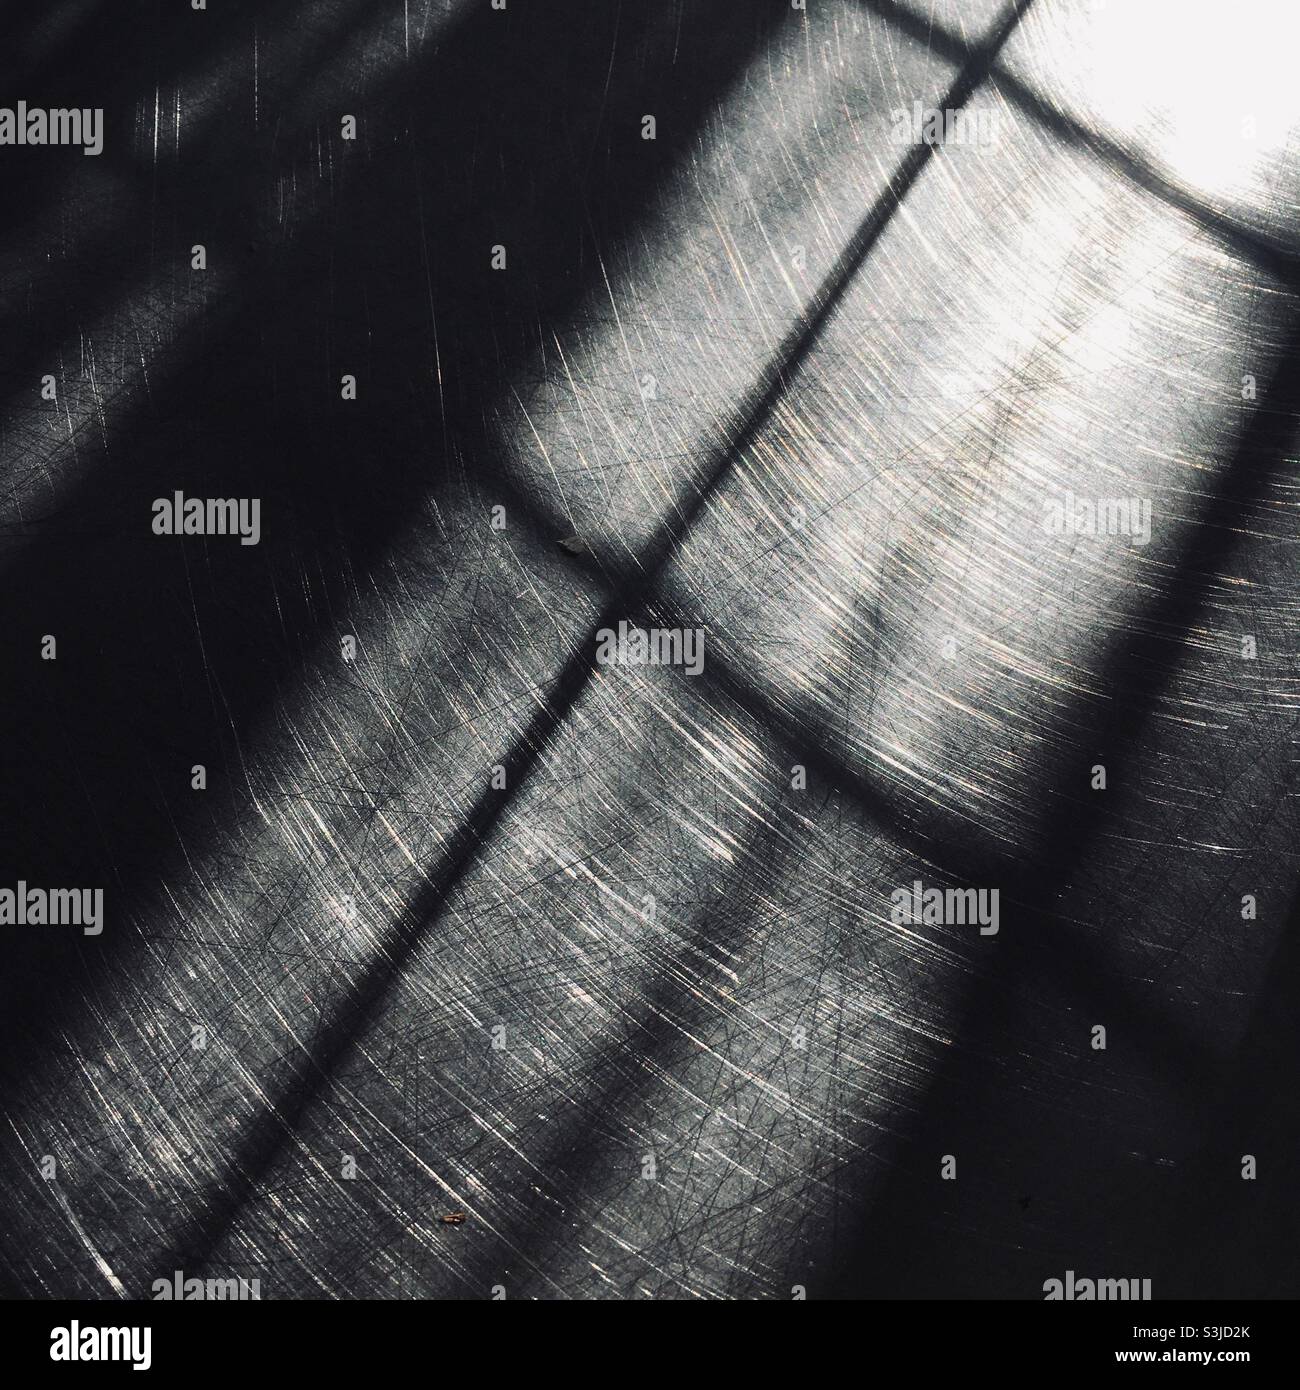 Light and shadow reflections on a chrome metal metallic scratched surface Stock Photo